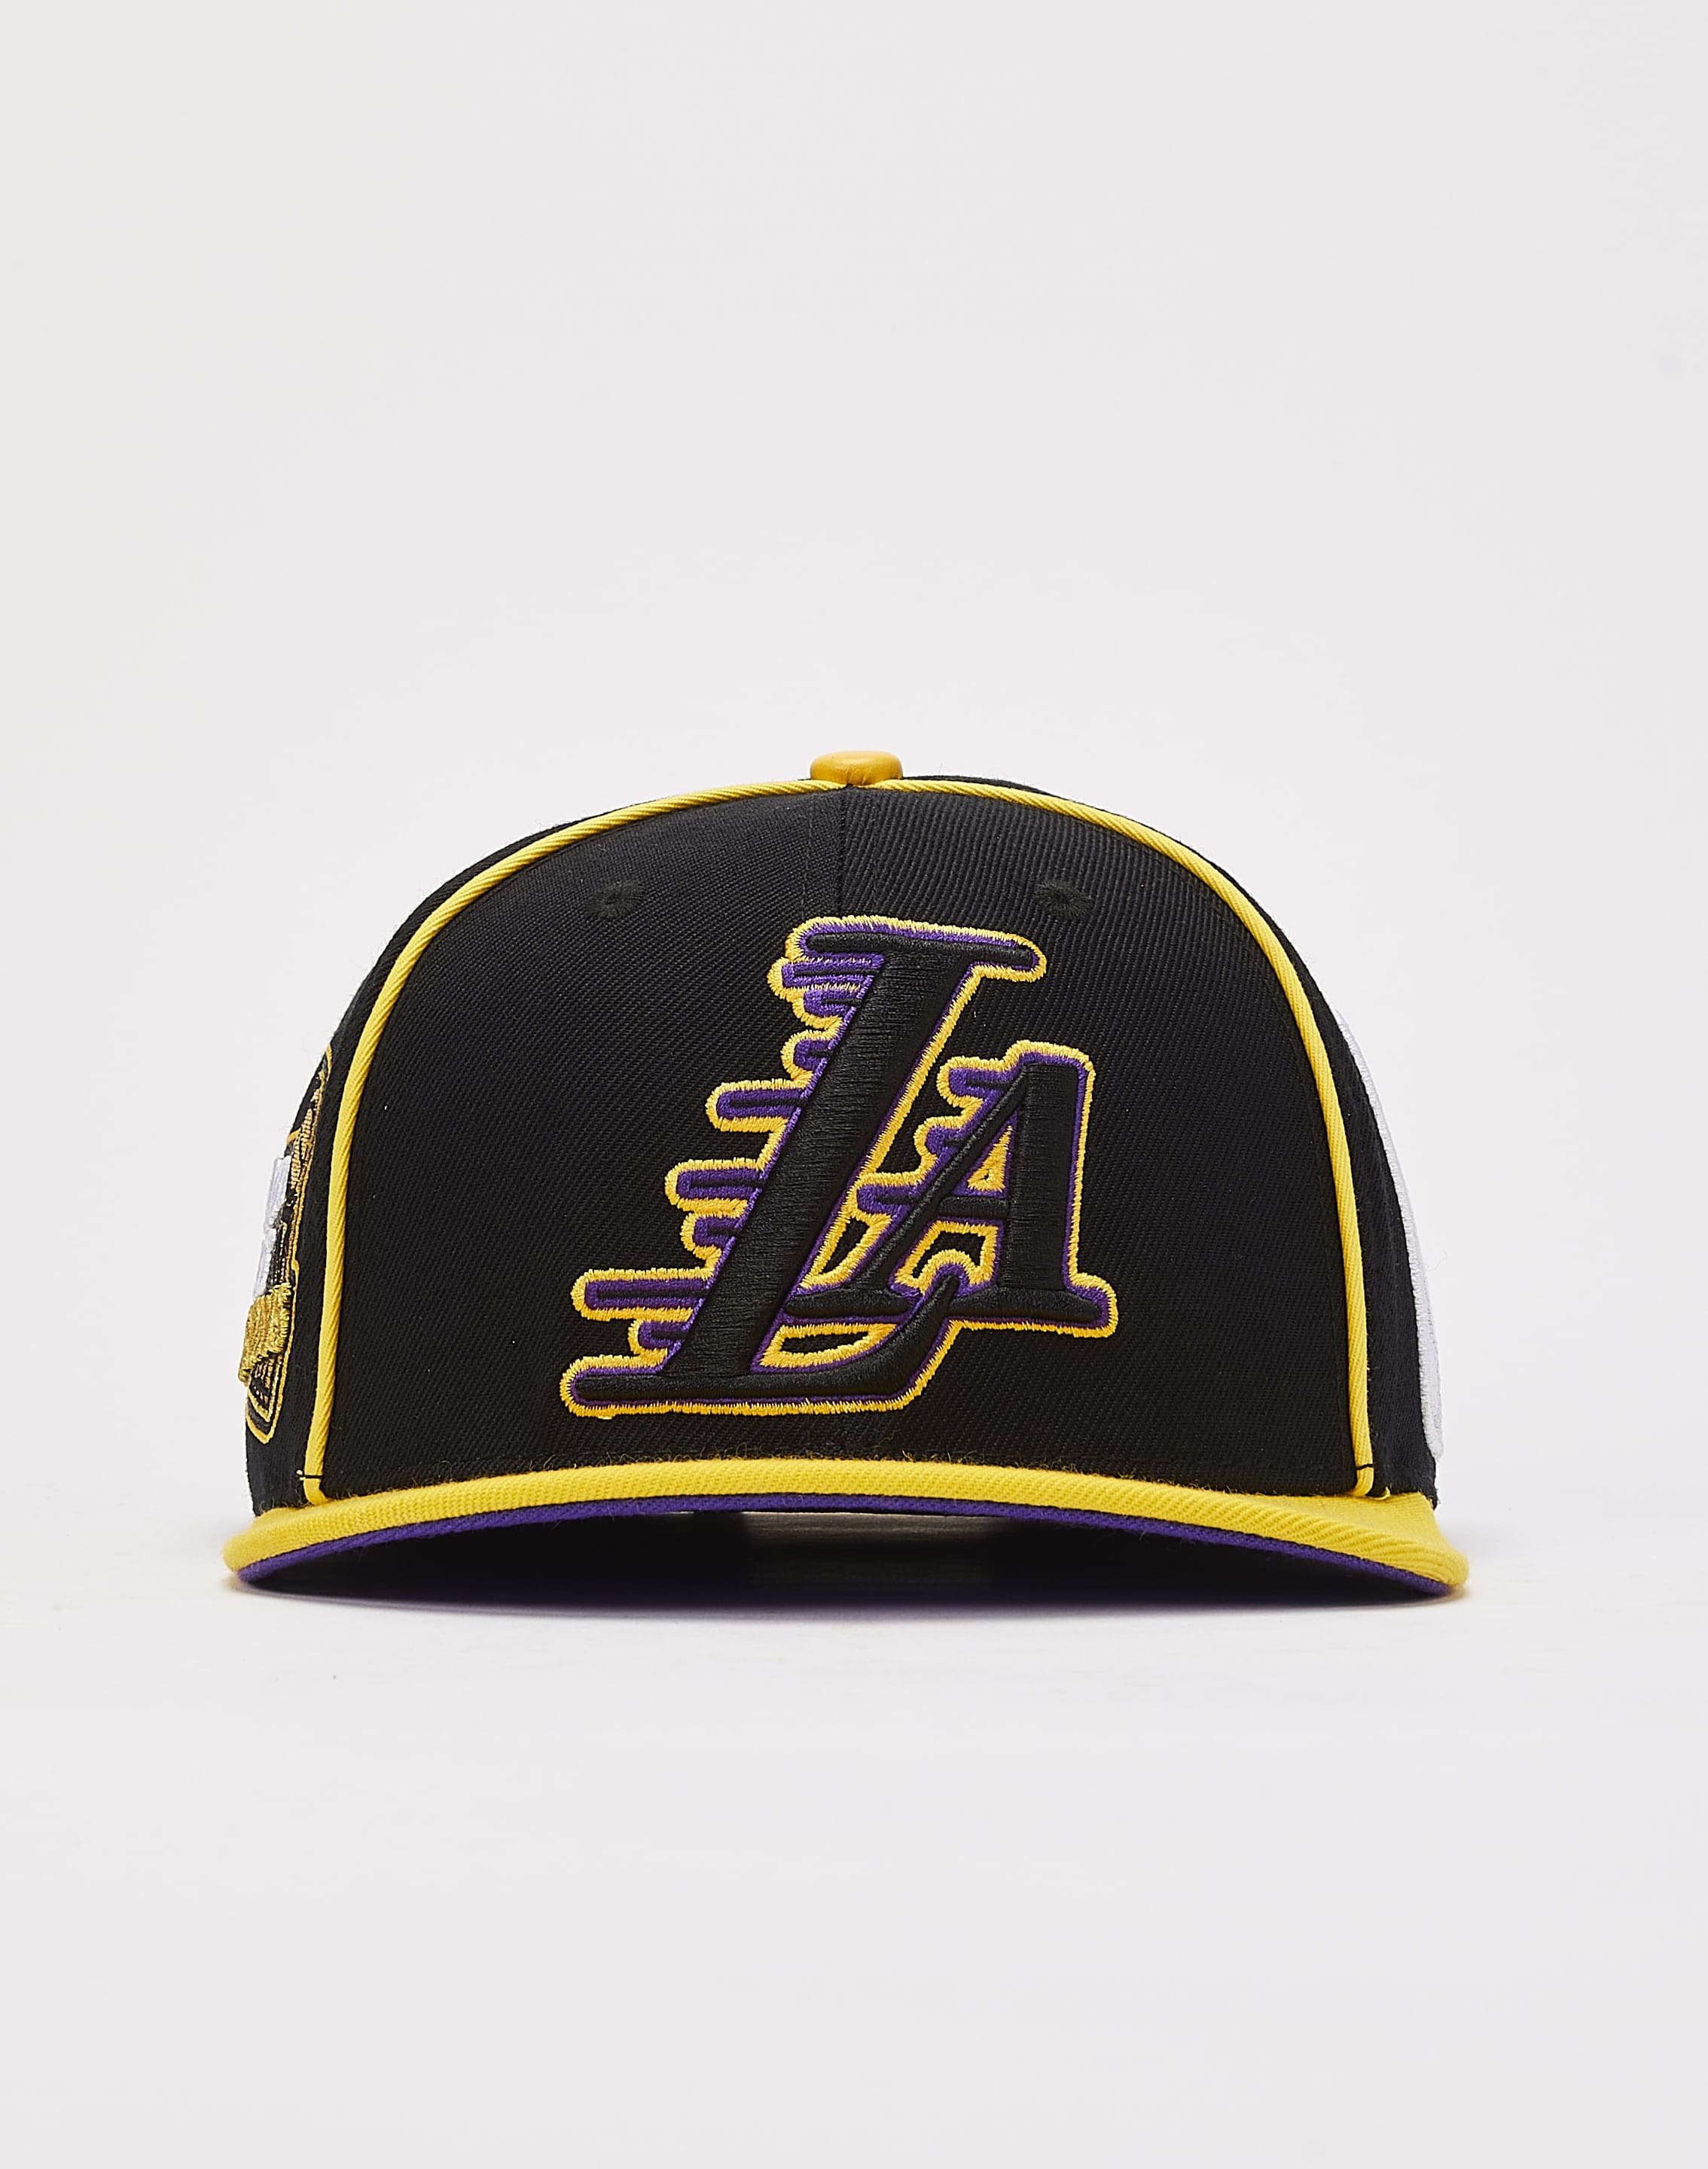 Los Angeles Lakers Pro Standard Any Condition Snapback Hat - Royal